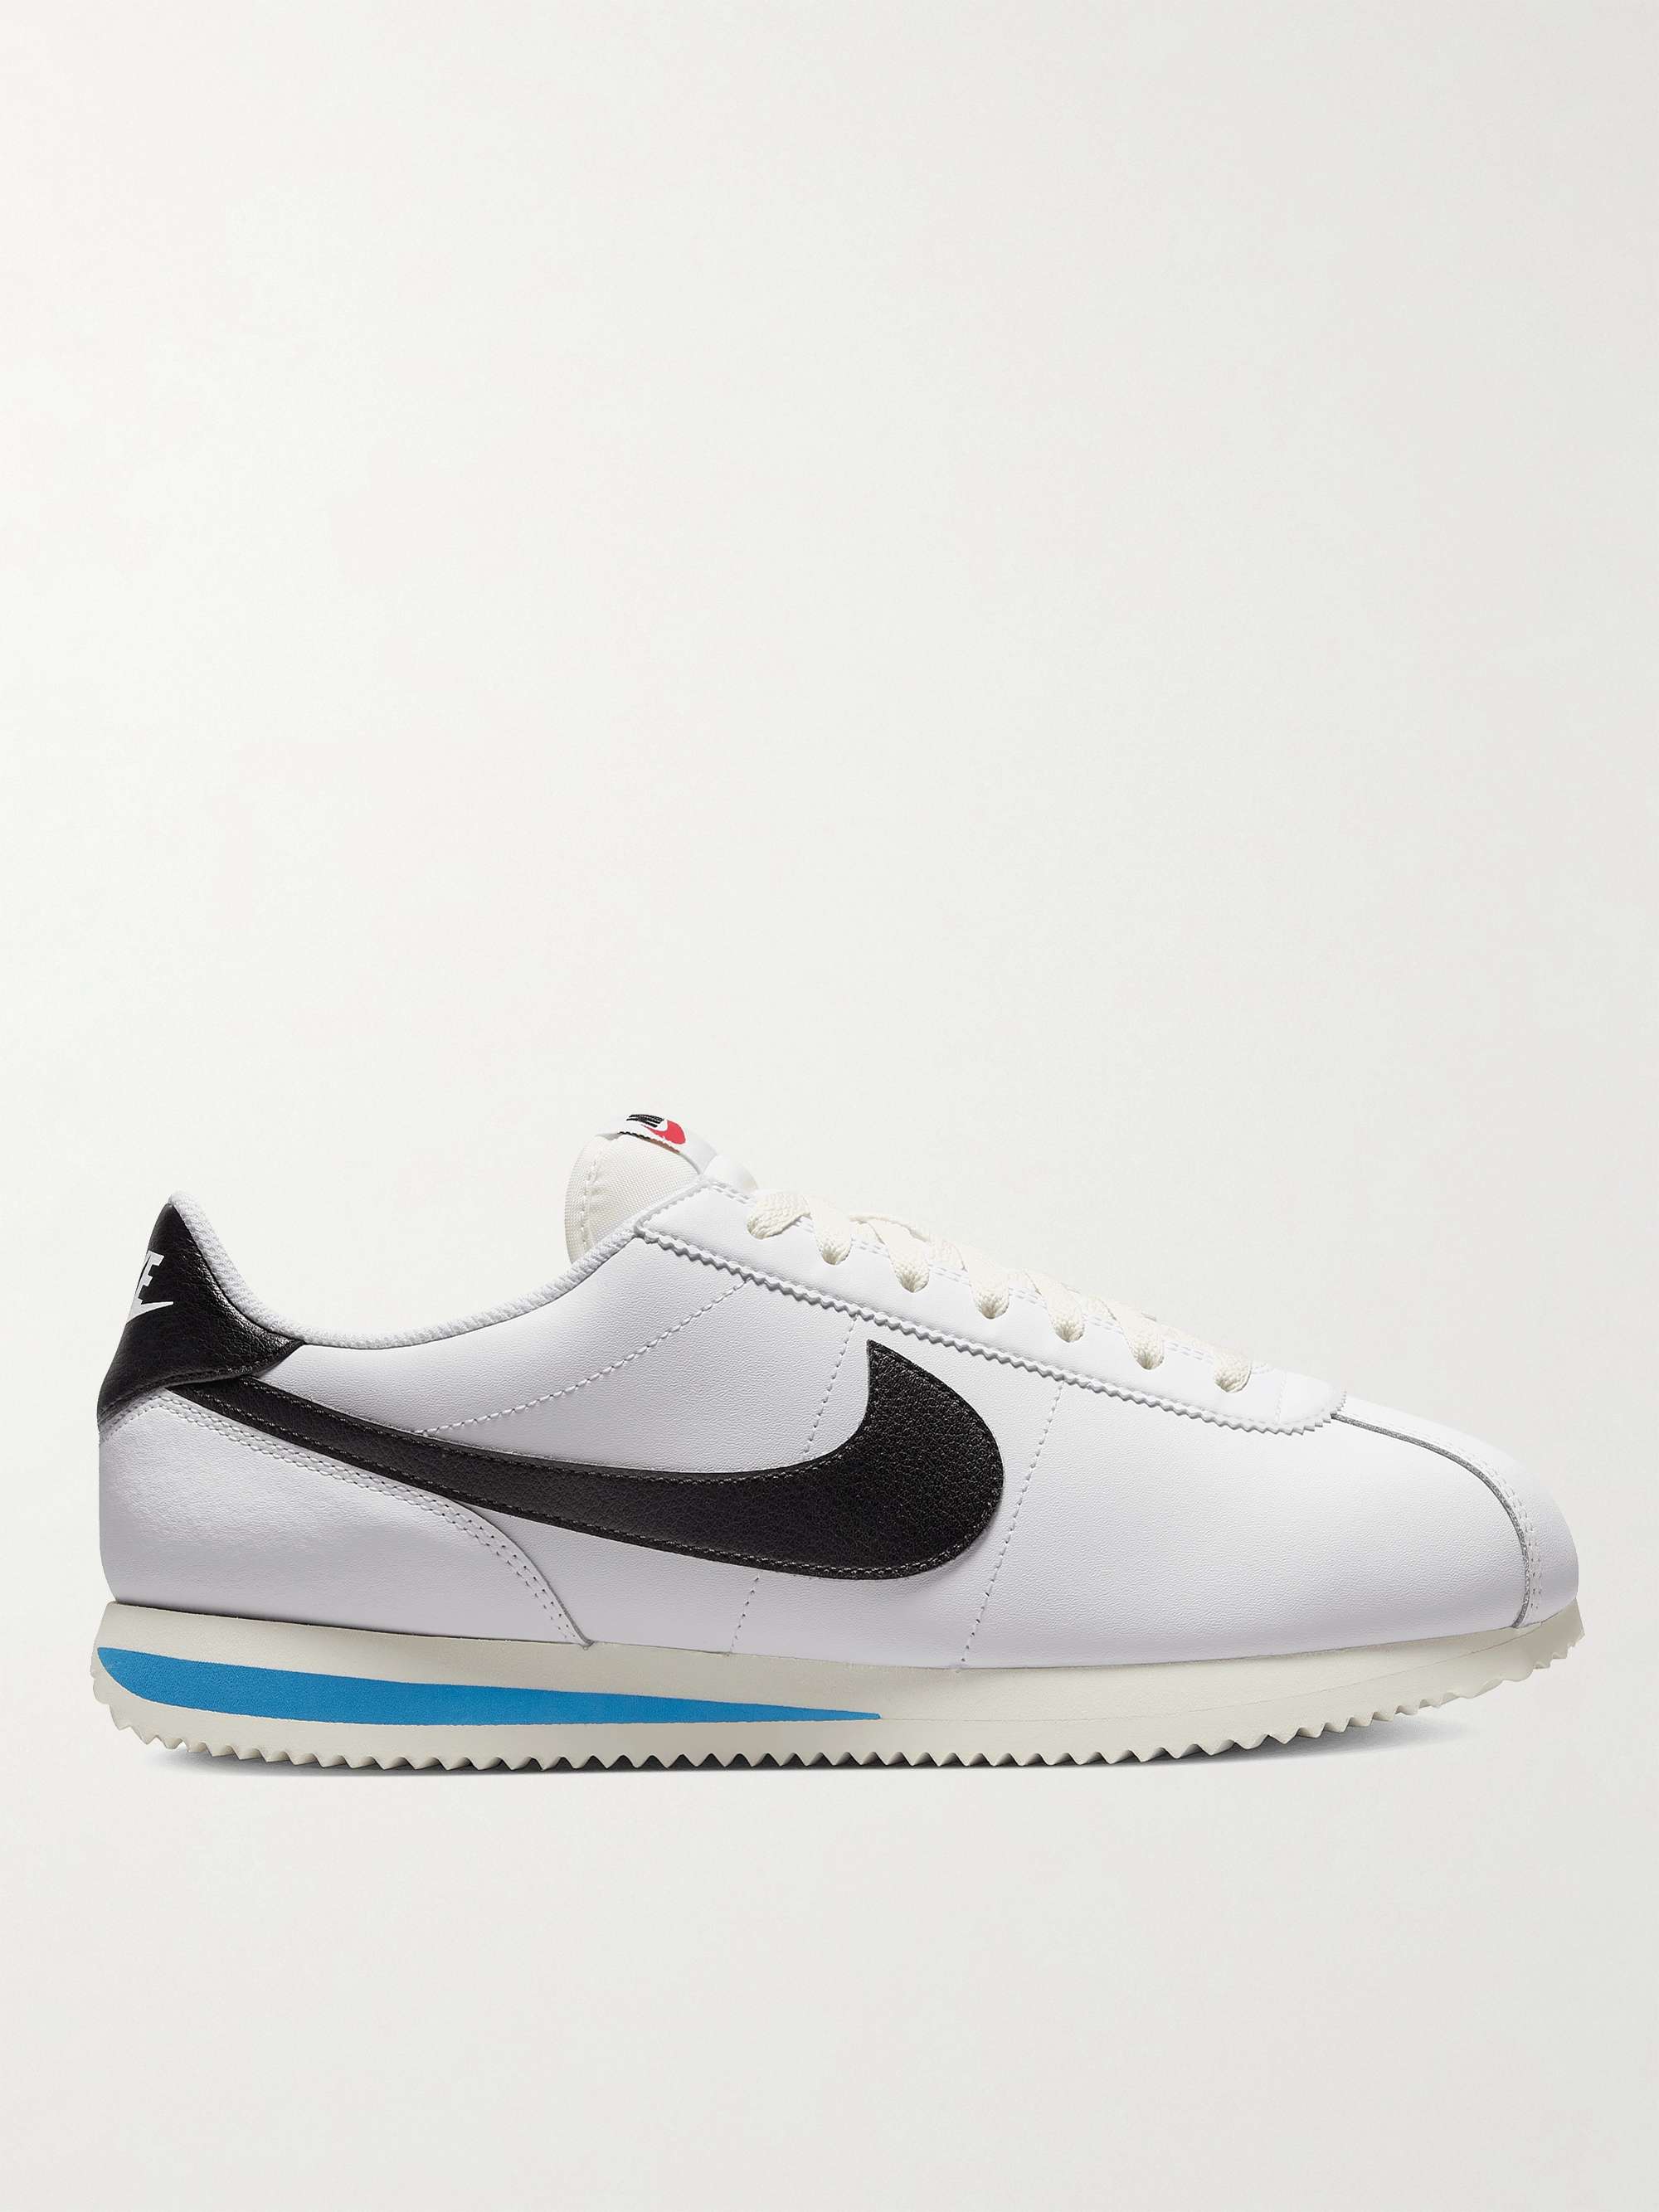 NIKE Cortez Leather Sneakers for Men | MR PORTER